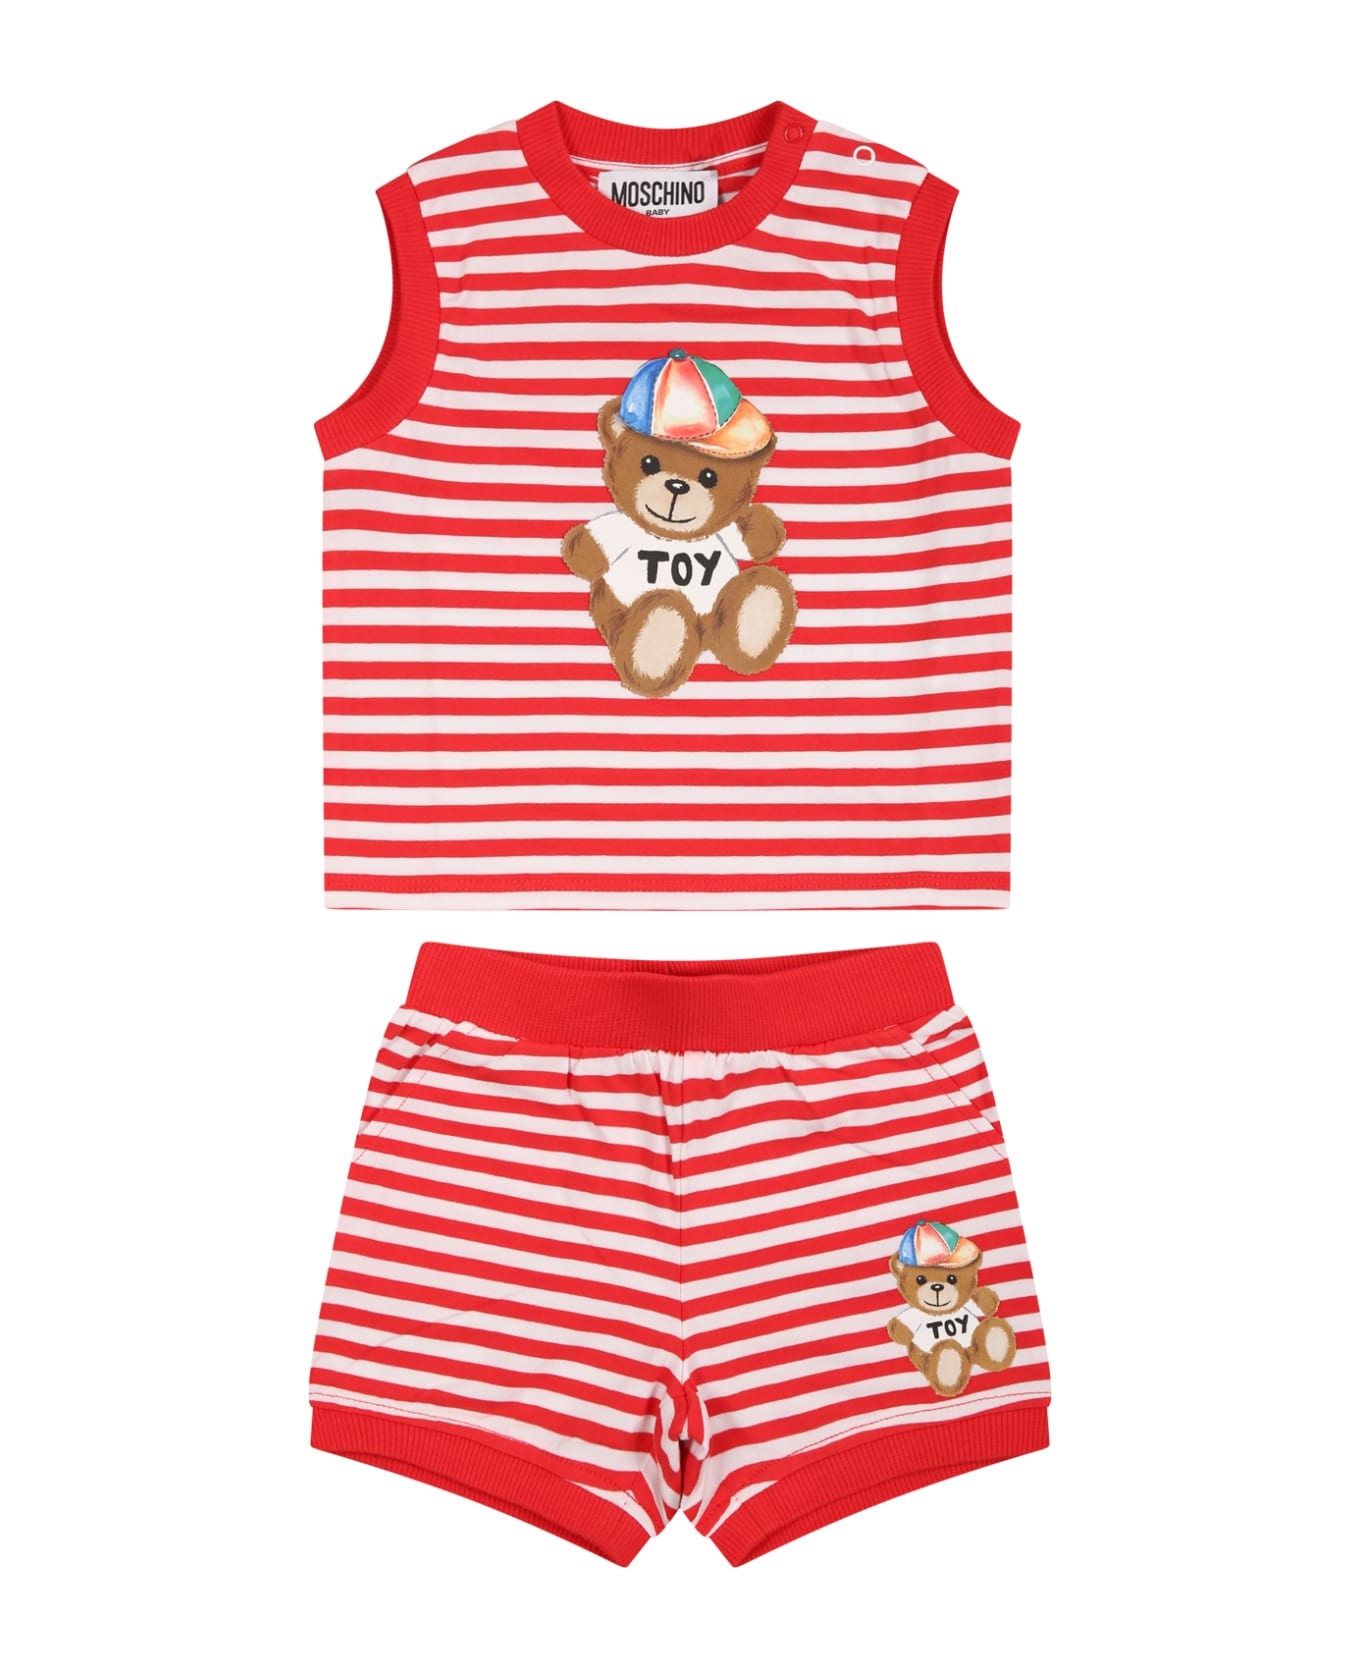 Moschino Red Suit For Baby Boy With Teddy Bear - Red